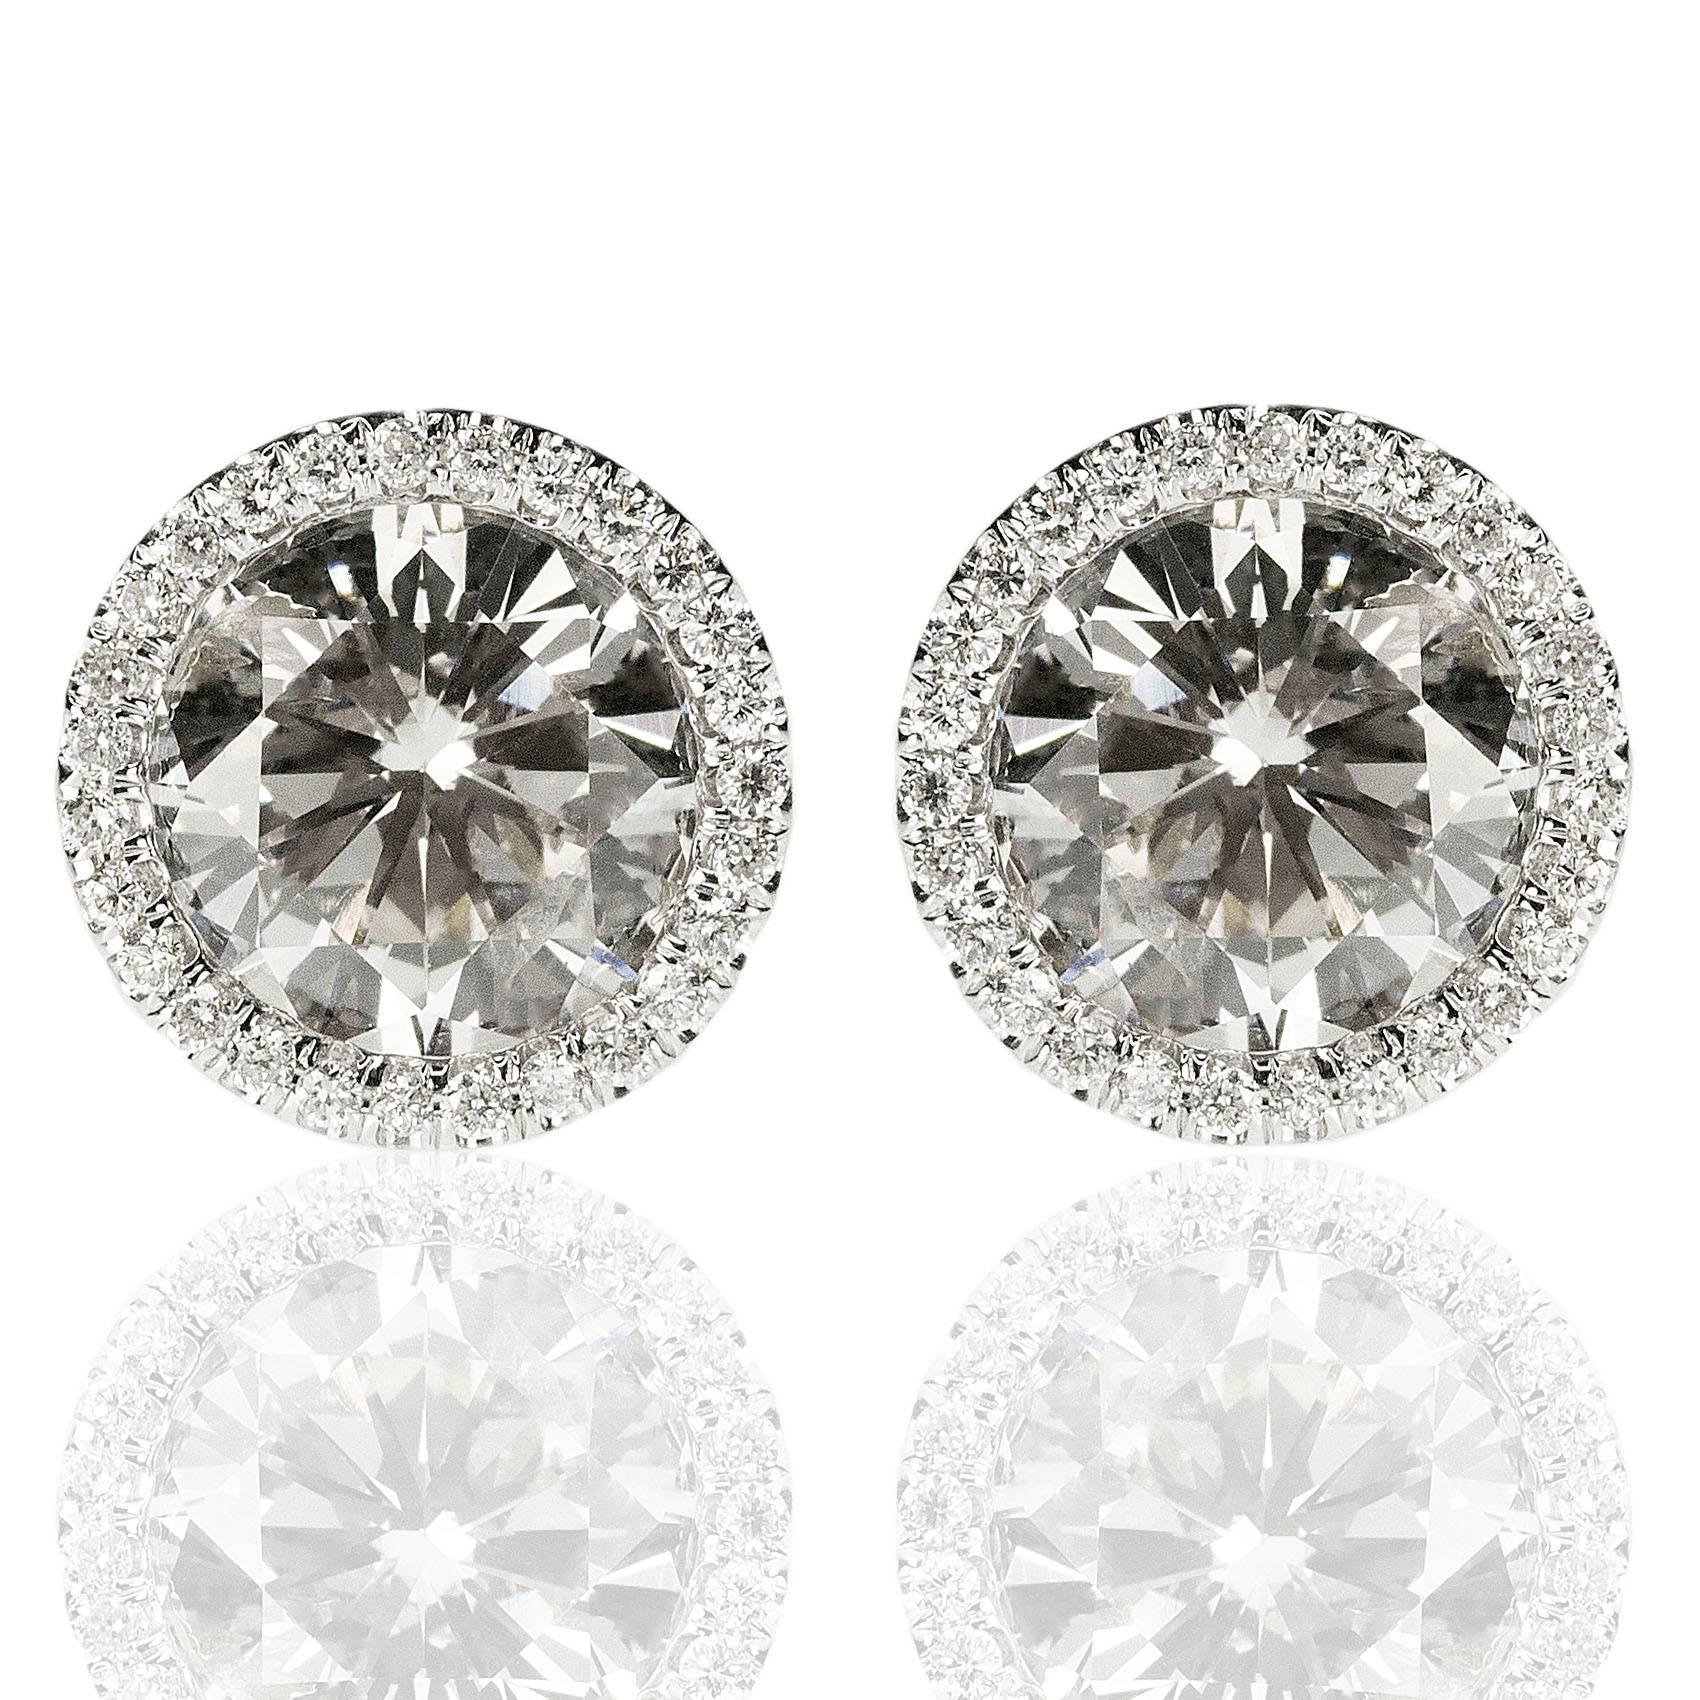 One pair of platinum earrings containing two modern round brilliant diamonds weighing approximately 3.70 carats total weight and 104 smaller round brilliant pave set diamonds weighing approximately 1.26 carats.  